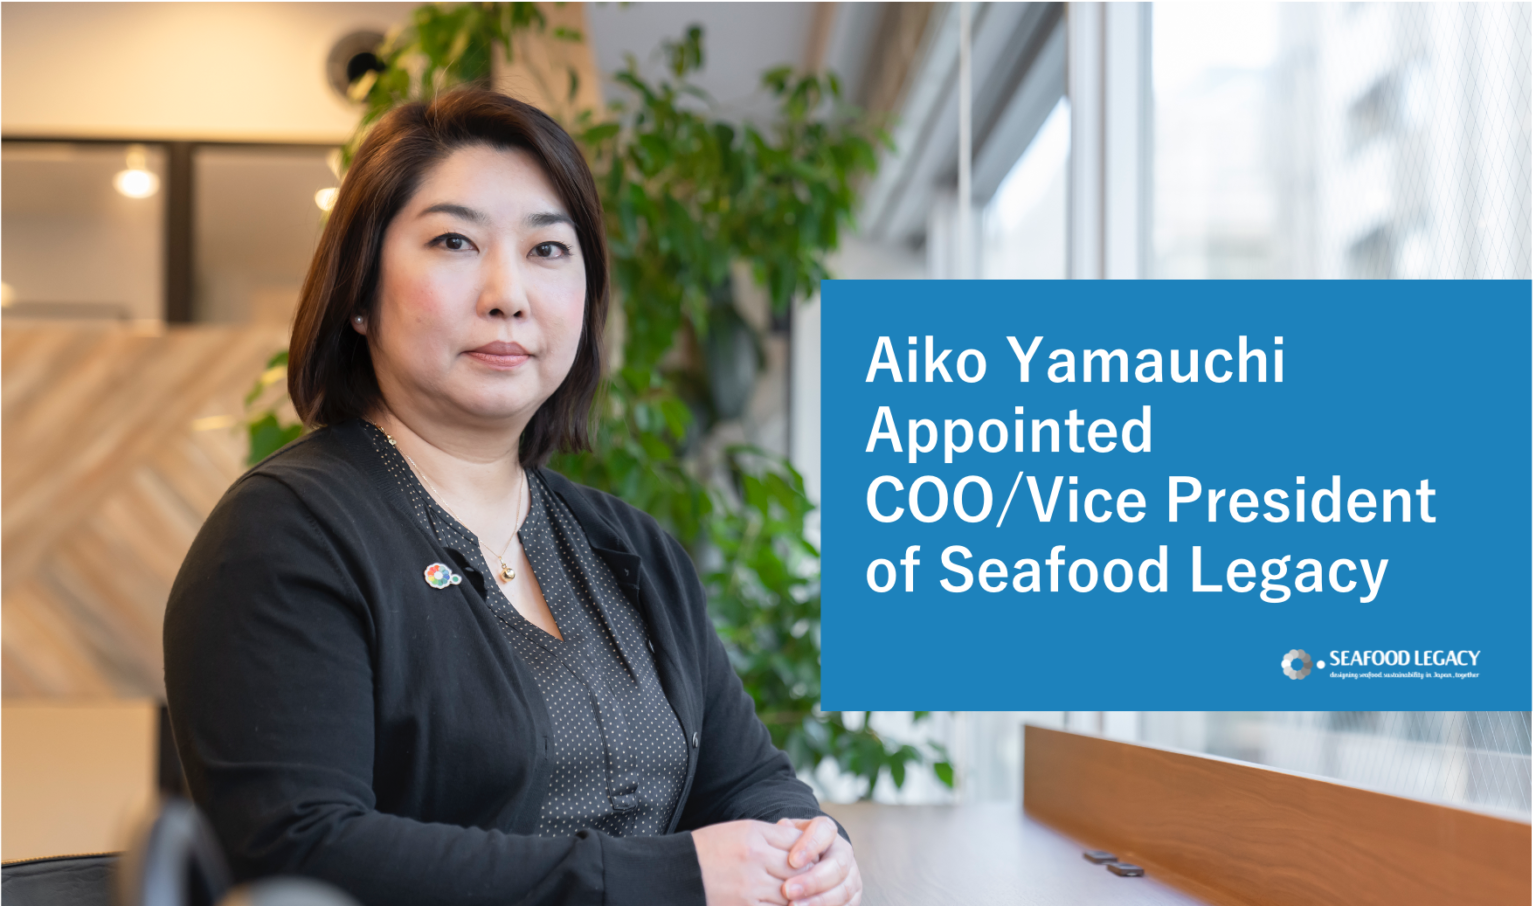 Aiko Yamauchi Appointed COO/Vice President of Seafood Legacy to Further Promote Sustainable Seafood